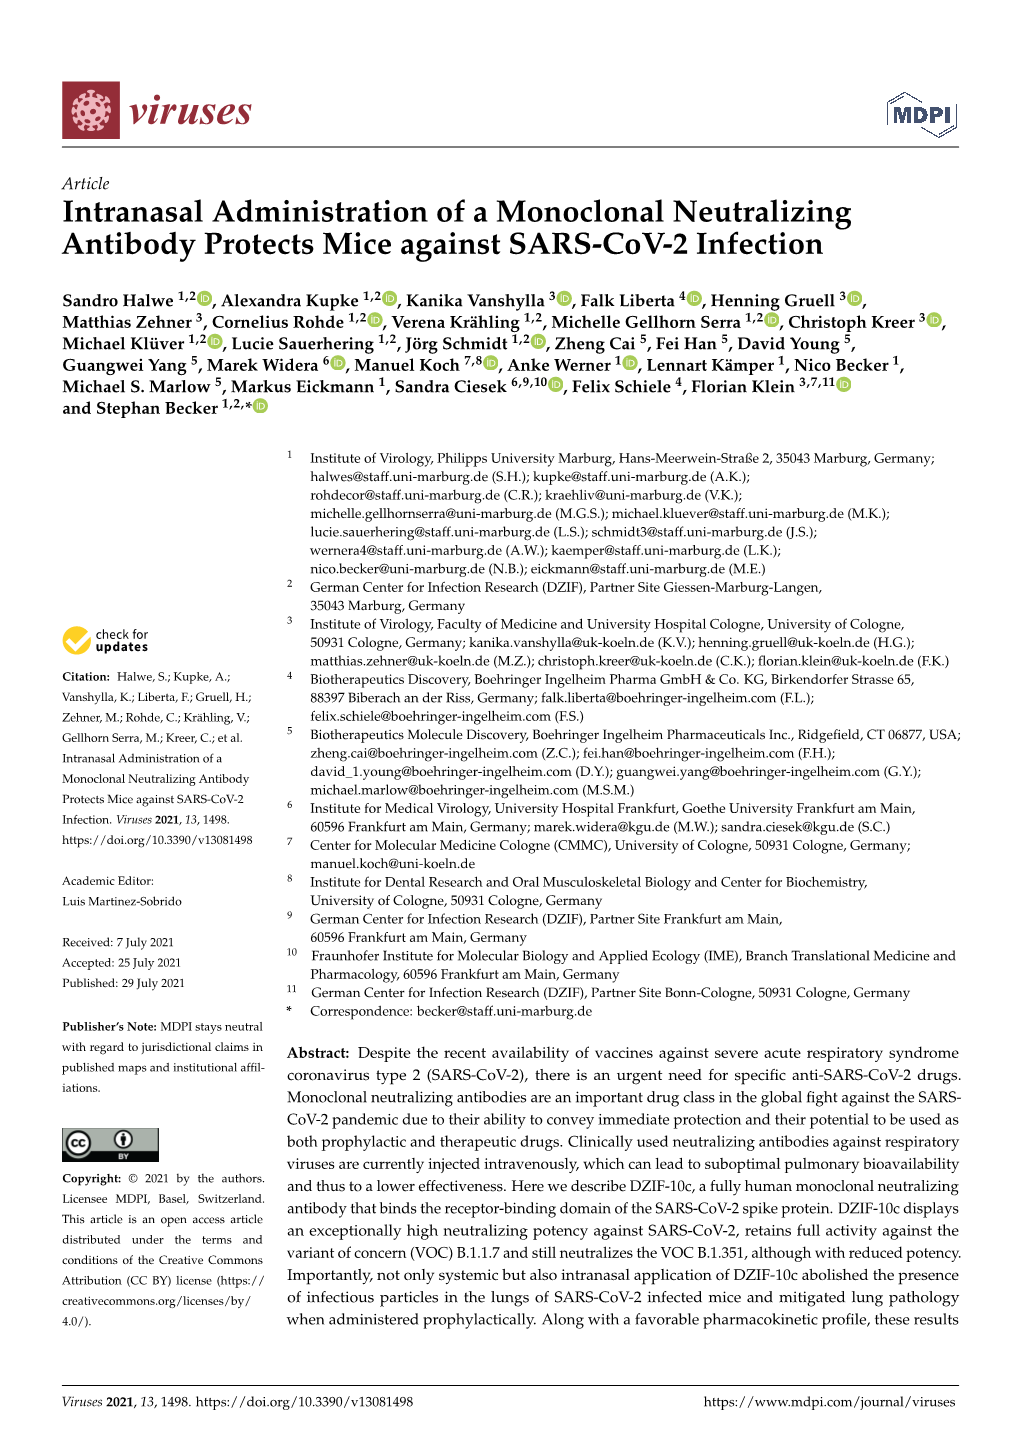 Intranasal Administration of a Monoclonal Neutralizing Antibody Protects Mice Against SARS-Cov-2 Infection